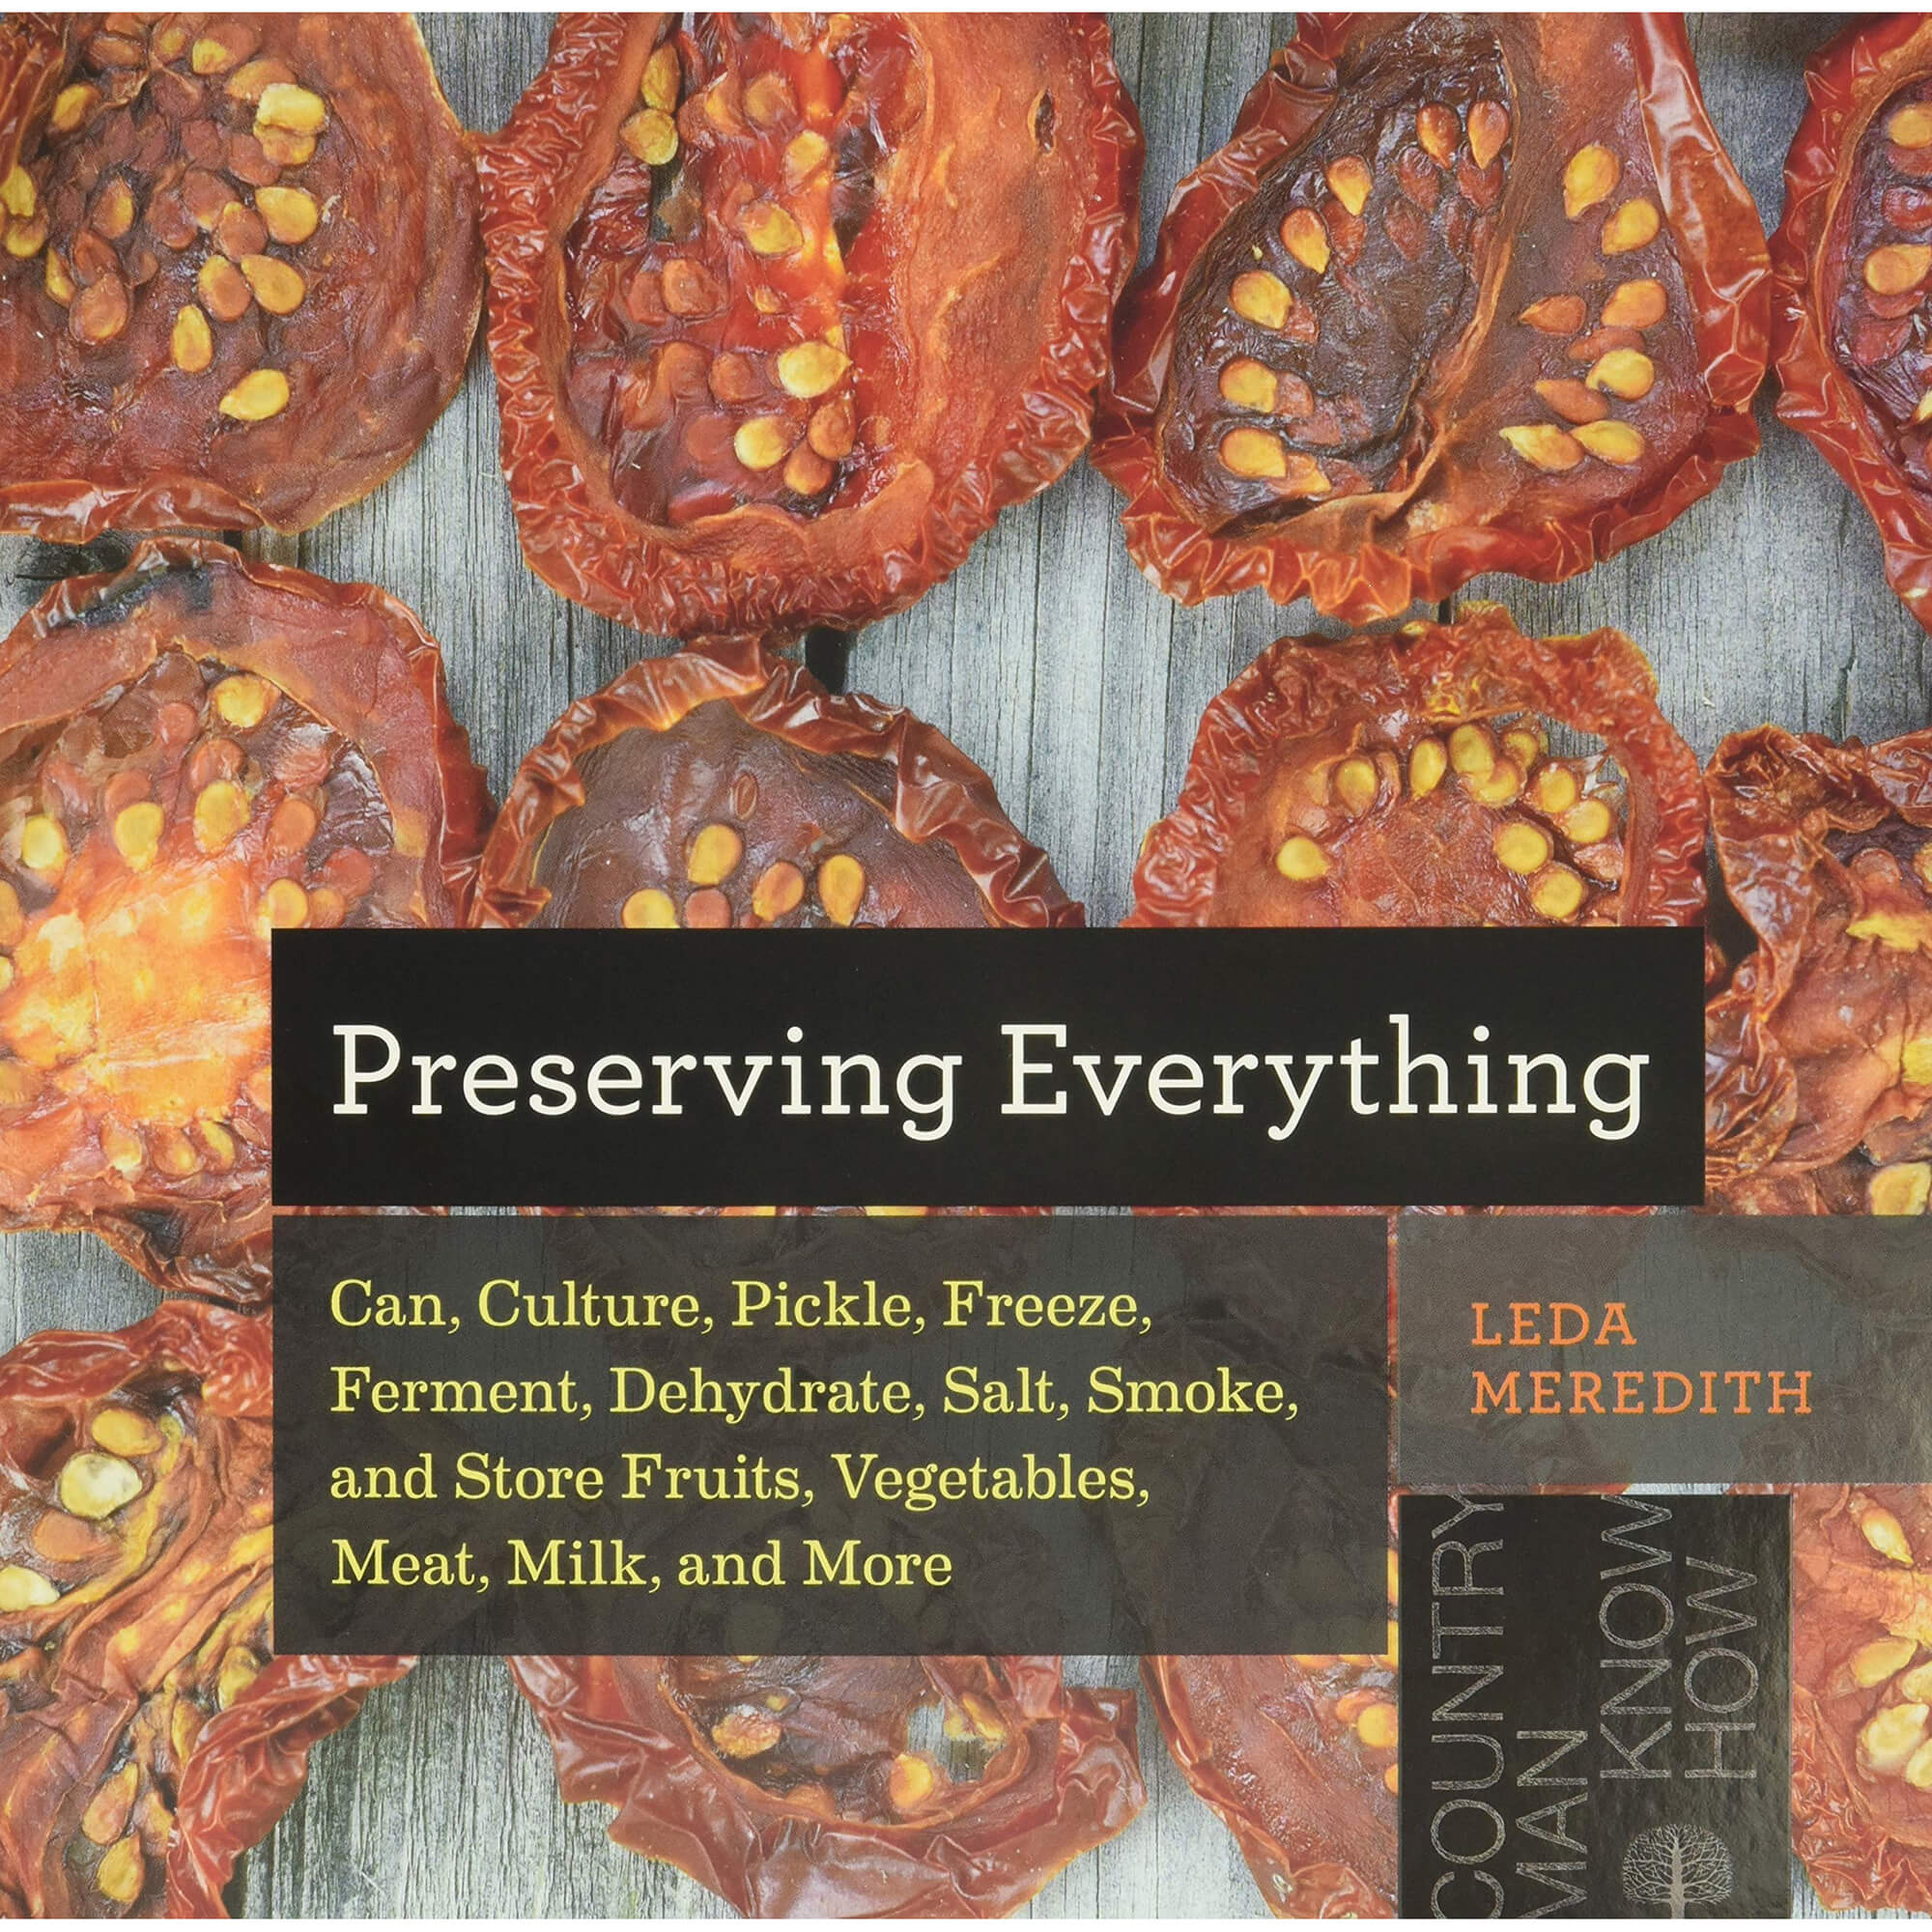 Preserving Everything: Can, Culture, Pickle, Freeze, Ferment, Dehydrate, Salt, Smoke, and Store Fruits, Vegetables, Meat, Milk, and More front cover.